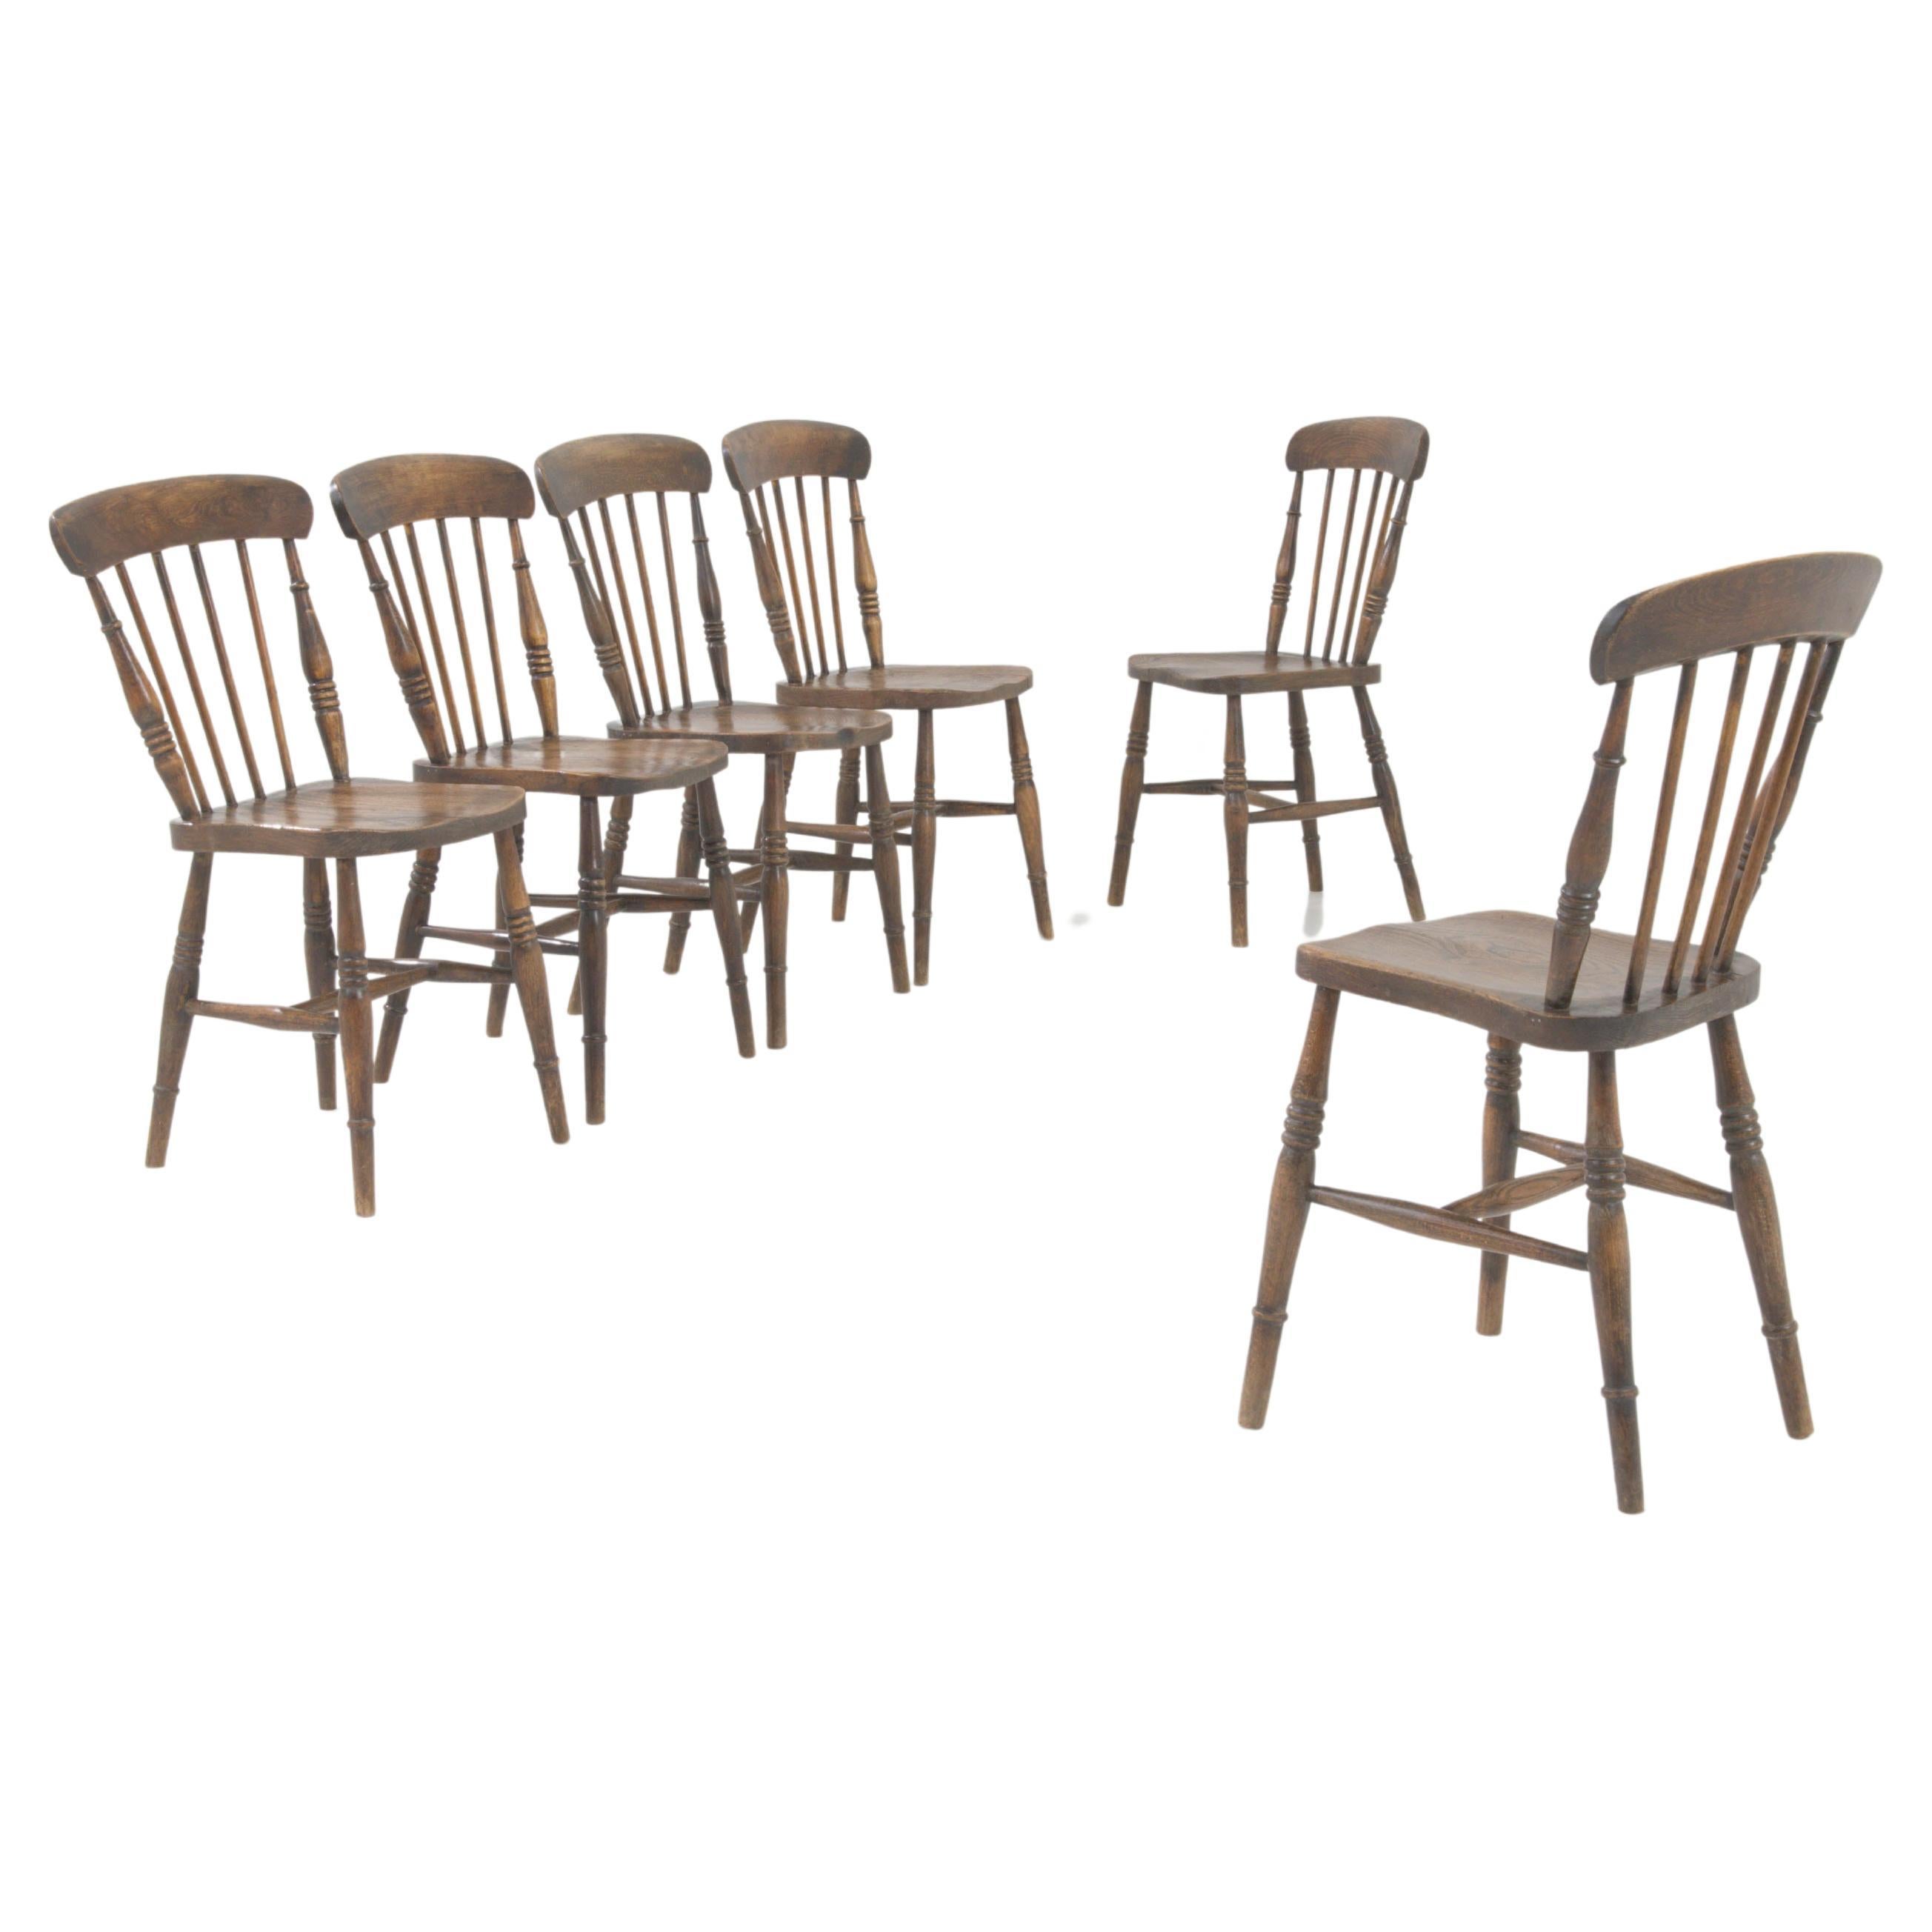 Early 20th Century Set Of 6 Wooden Dining Chairs For Sale